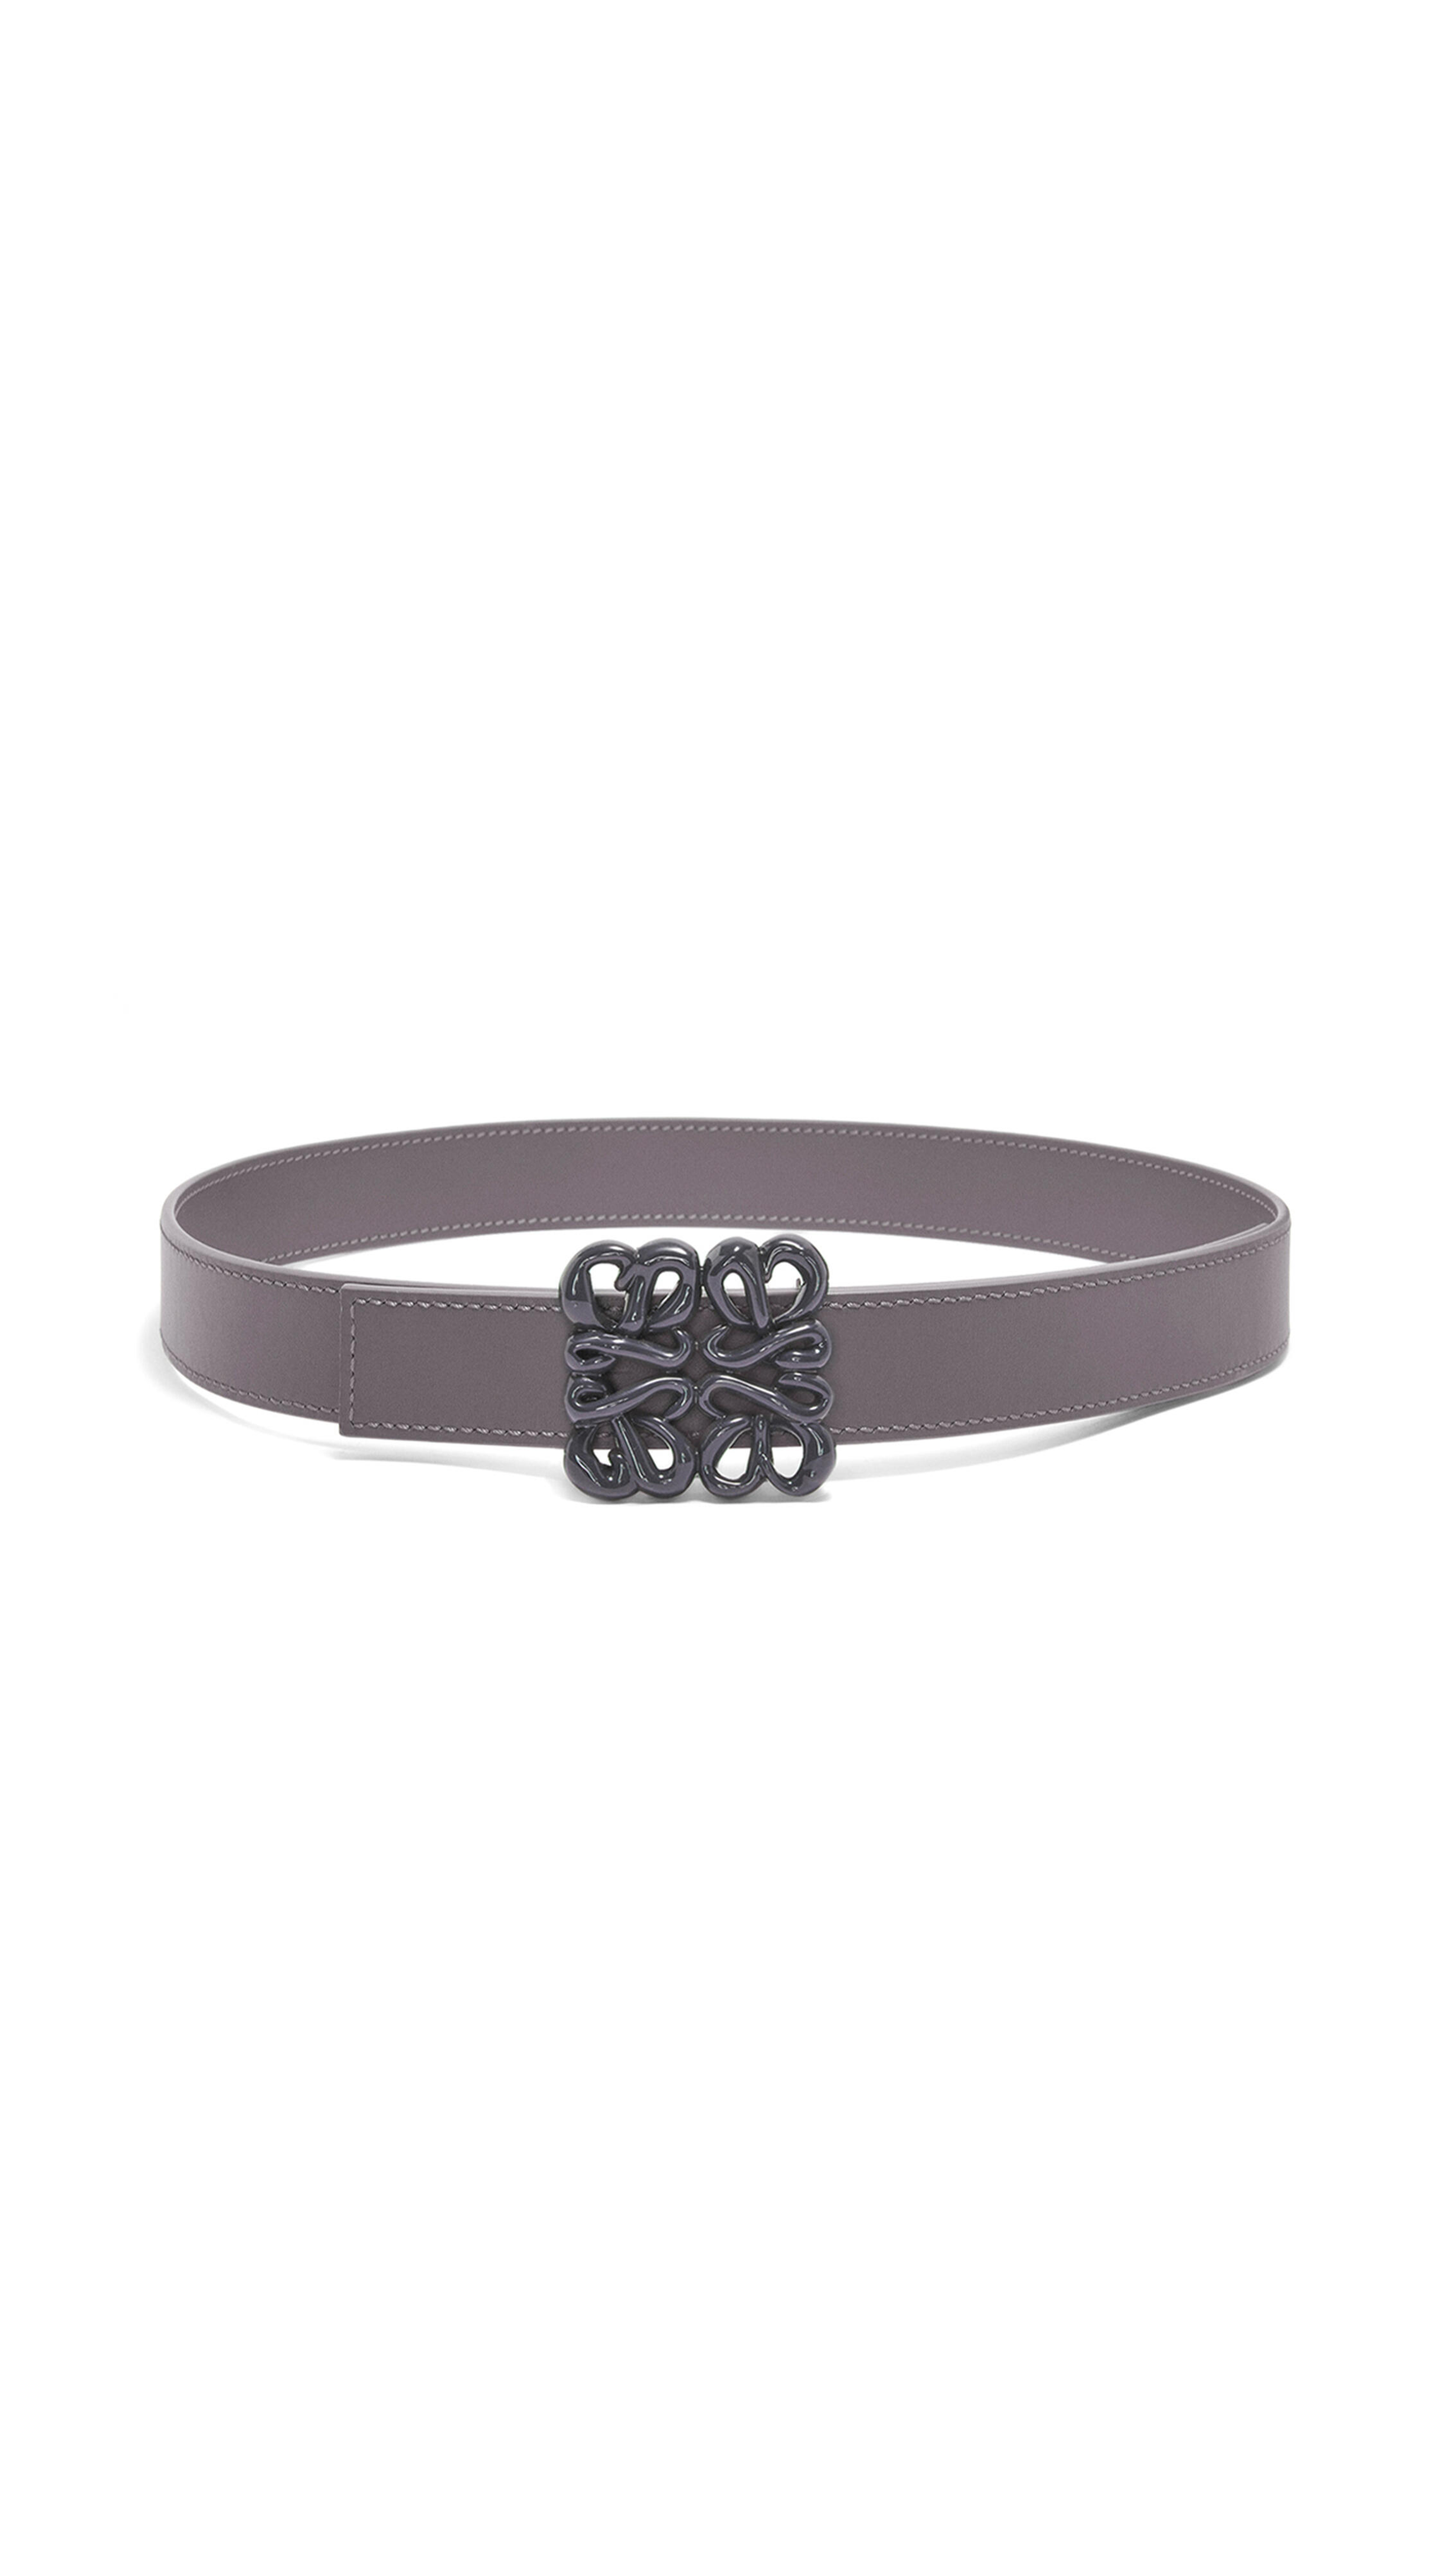 Reversible Inflated Anagram Belt in Soft Calfskin - Anthracite/Onyx Blue